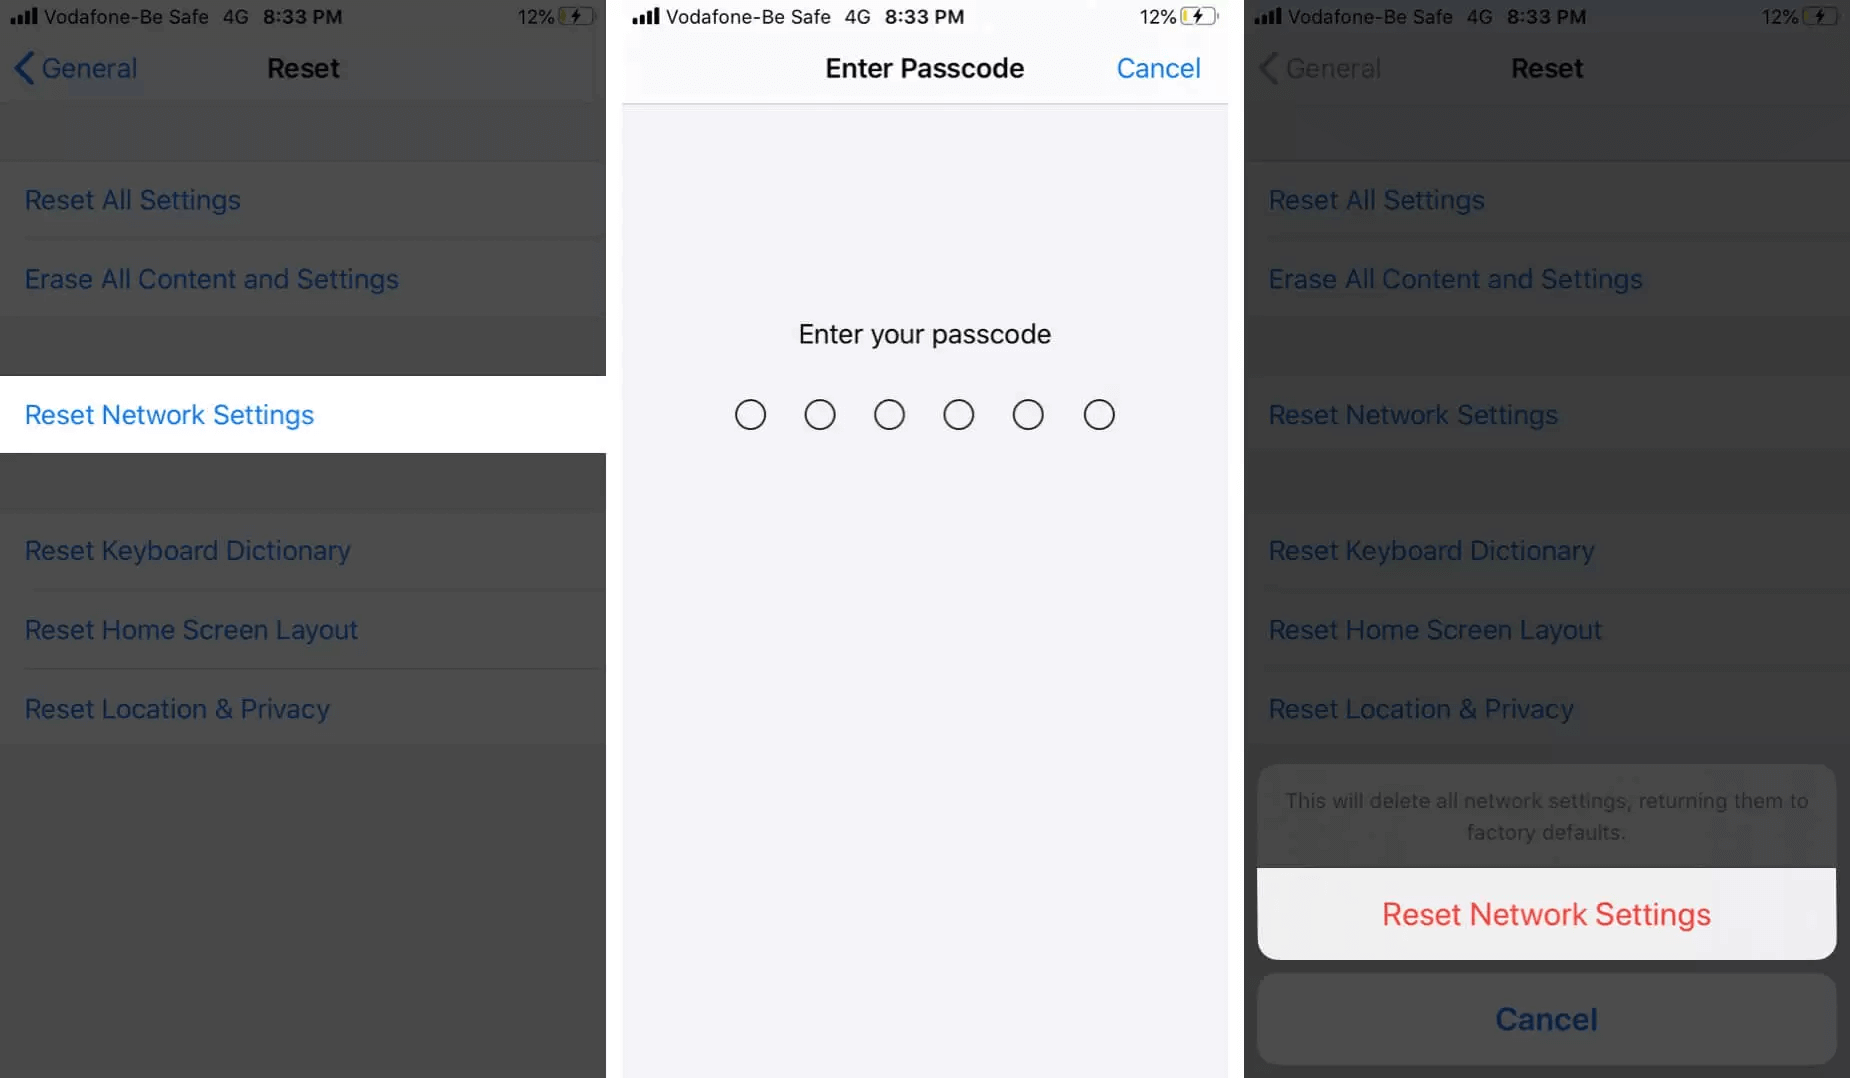 Reset Network Settings On iPhone